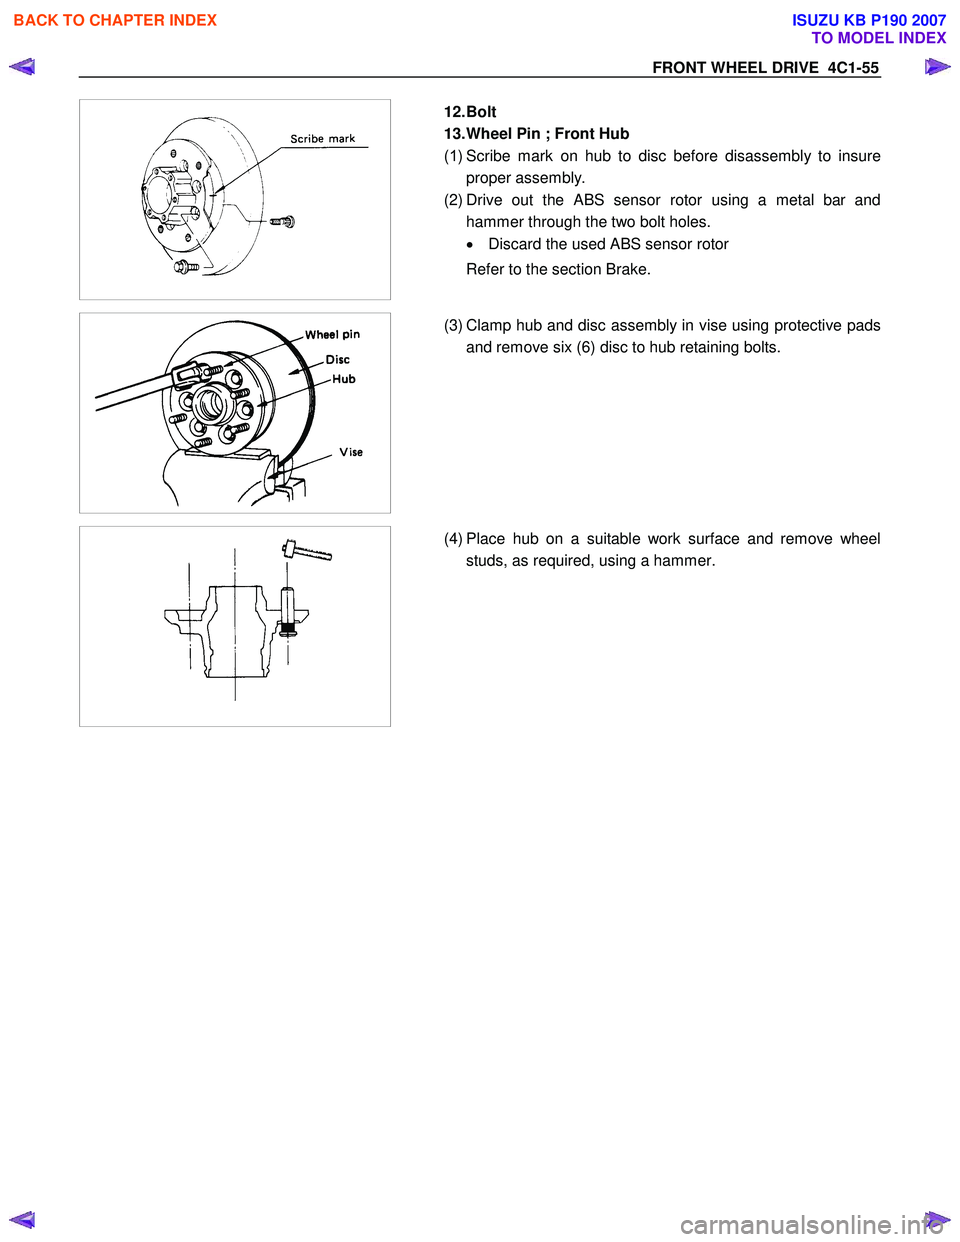 ISUZU KB P190 2007  Workshop Owners Manual FRONT WHEEL DRIVE  4C1-55 
 
 
 
  
  12. Bolt  
13. Wheel Pin ; Front Hub 
( 1 ) Scribe mark on hub to disc before disassembly to insure
proper assembly. 
(2) Drive out the ABS sensor rotor using a m